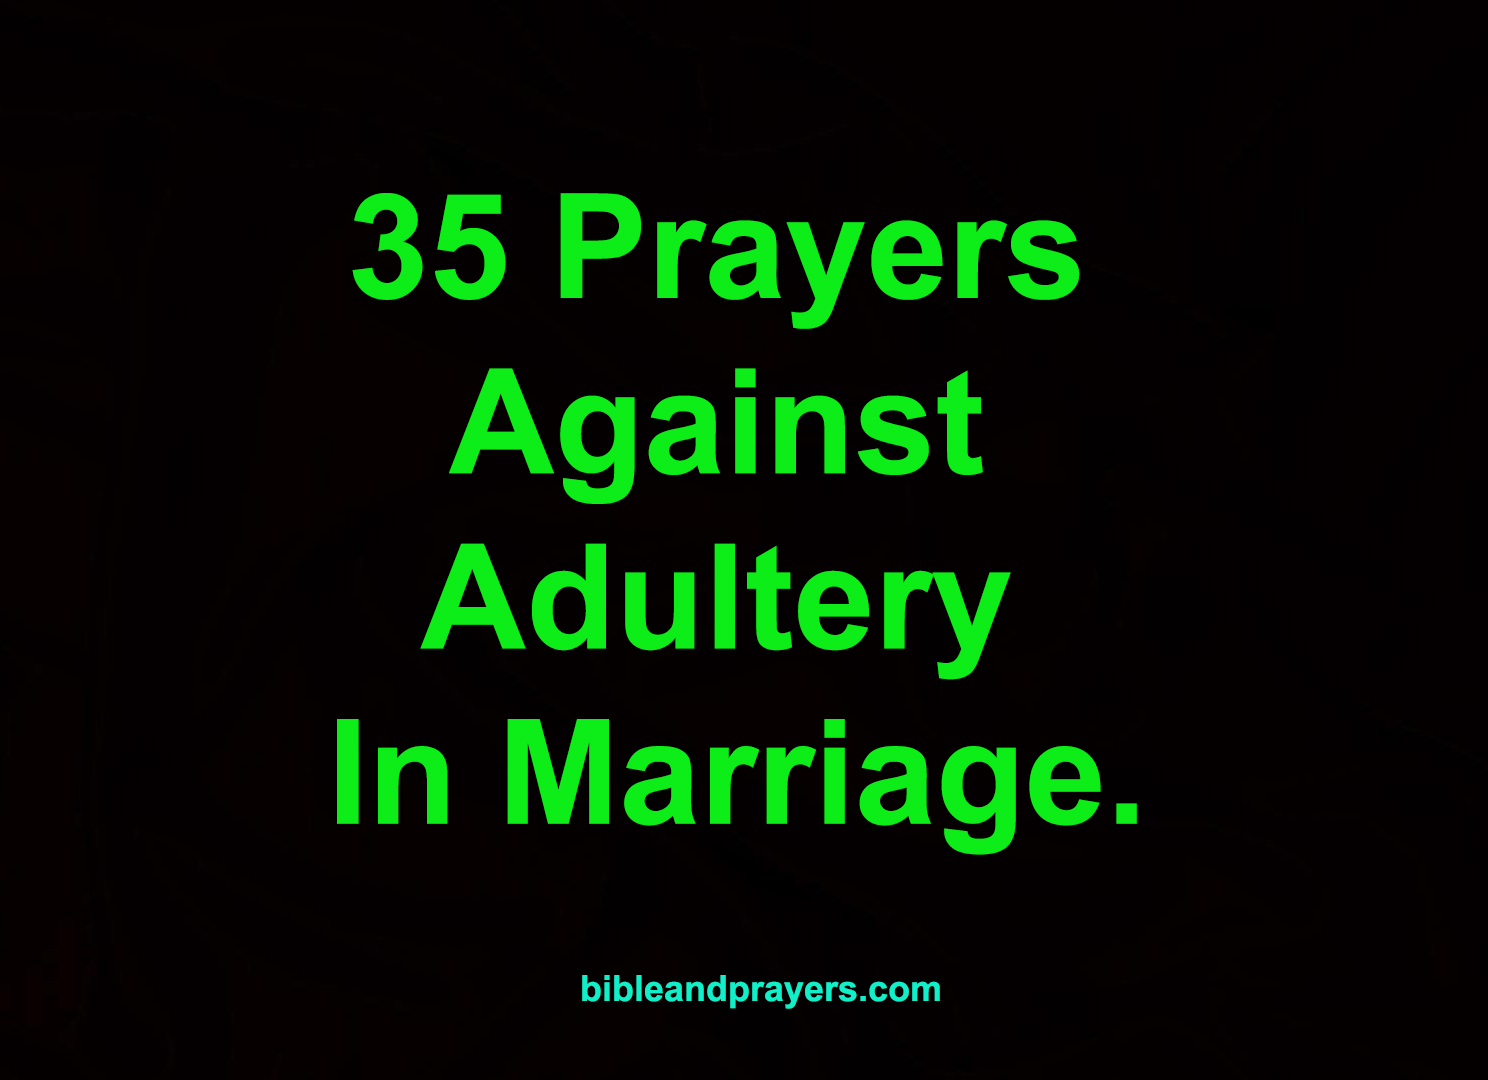 35 Prayer Against Adultery In Marriage.